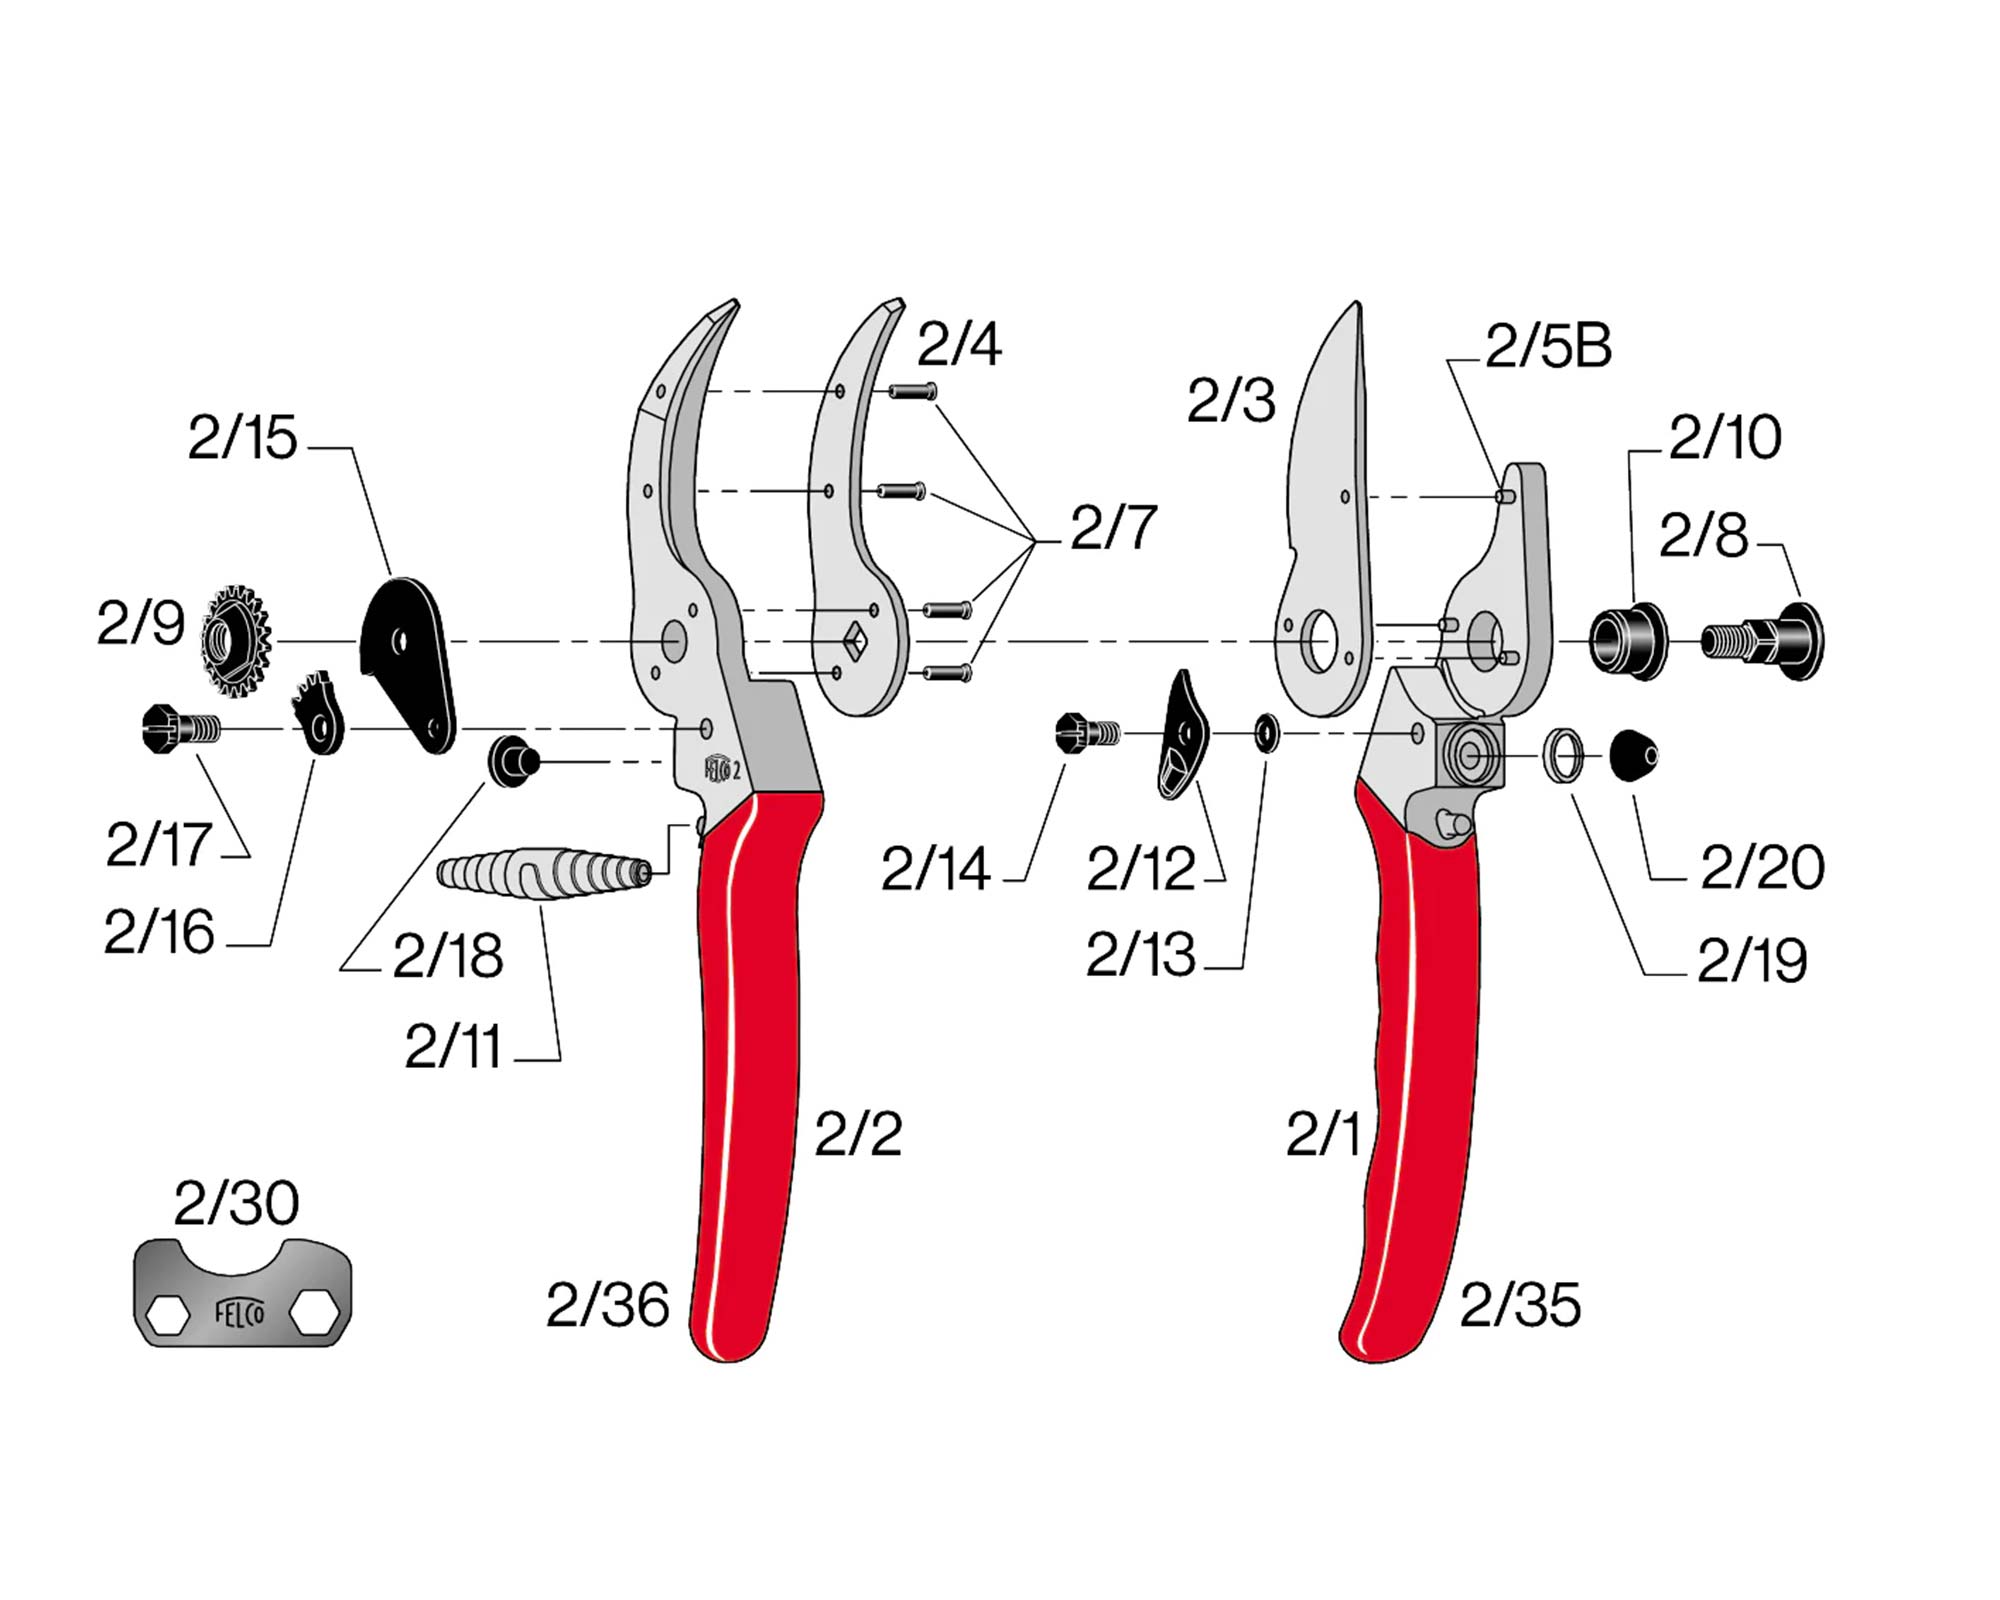 Diagram of Felco 2 showing the part in question being the spare blade Part#2/3